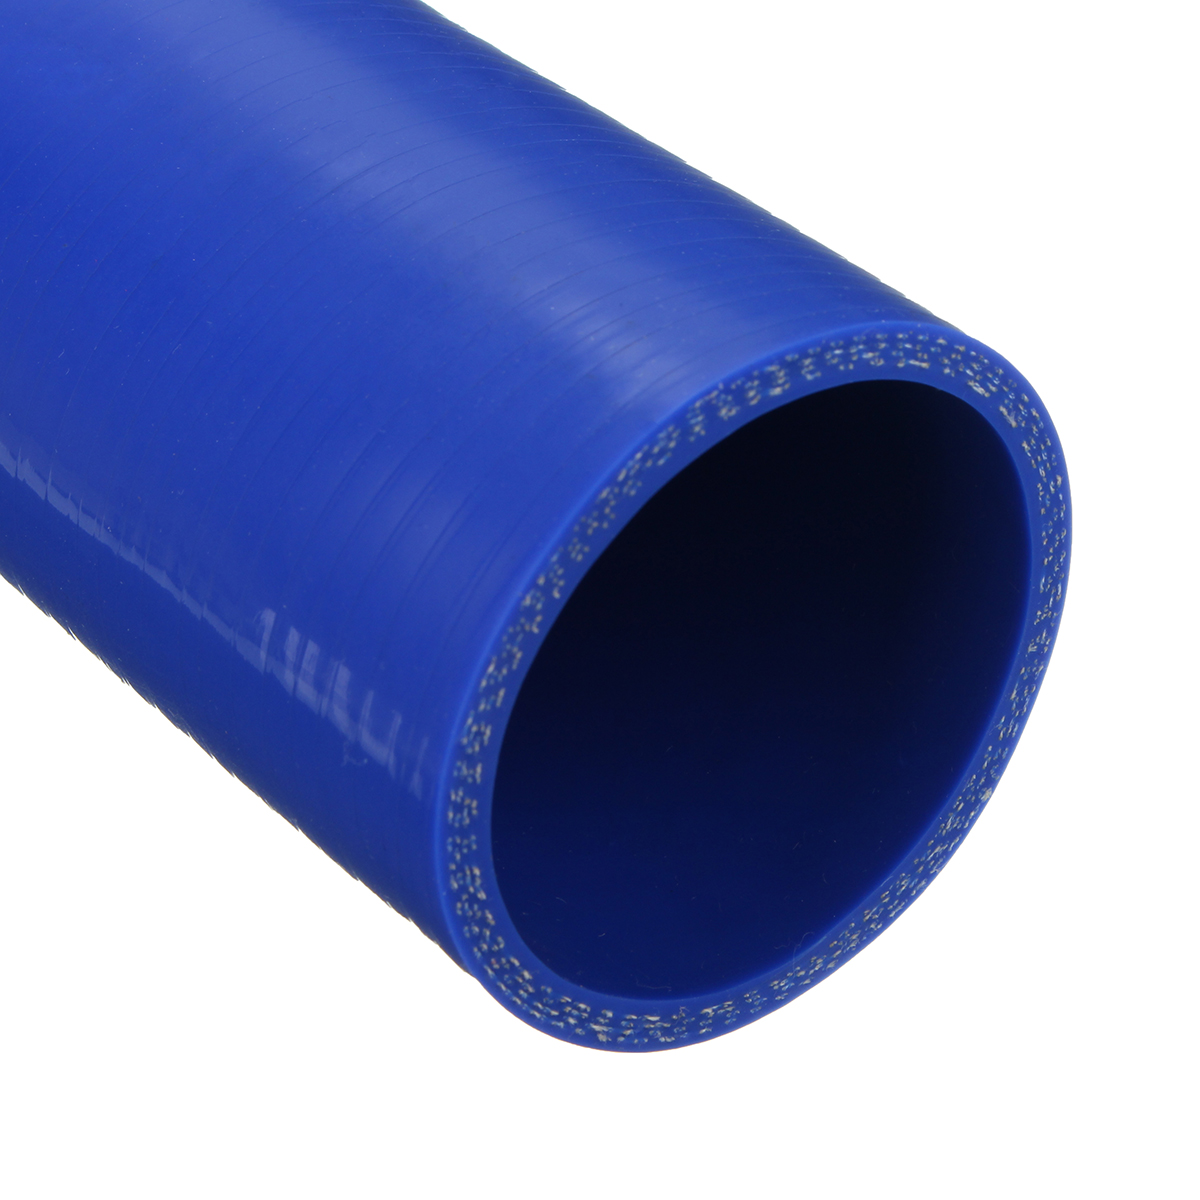 150mm-Silicone-Hose-Rubber-15-Degree-Elbow-Bend-Hose-Air-Water-Coolant-Joiner-Pipe-Tube-1587657-7